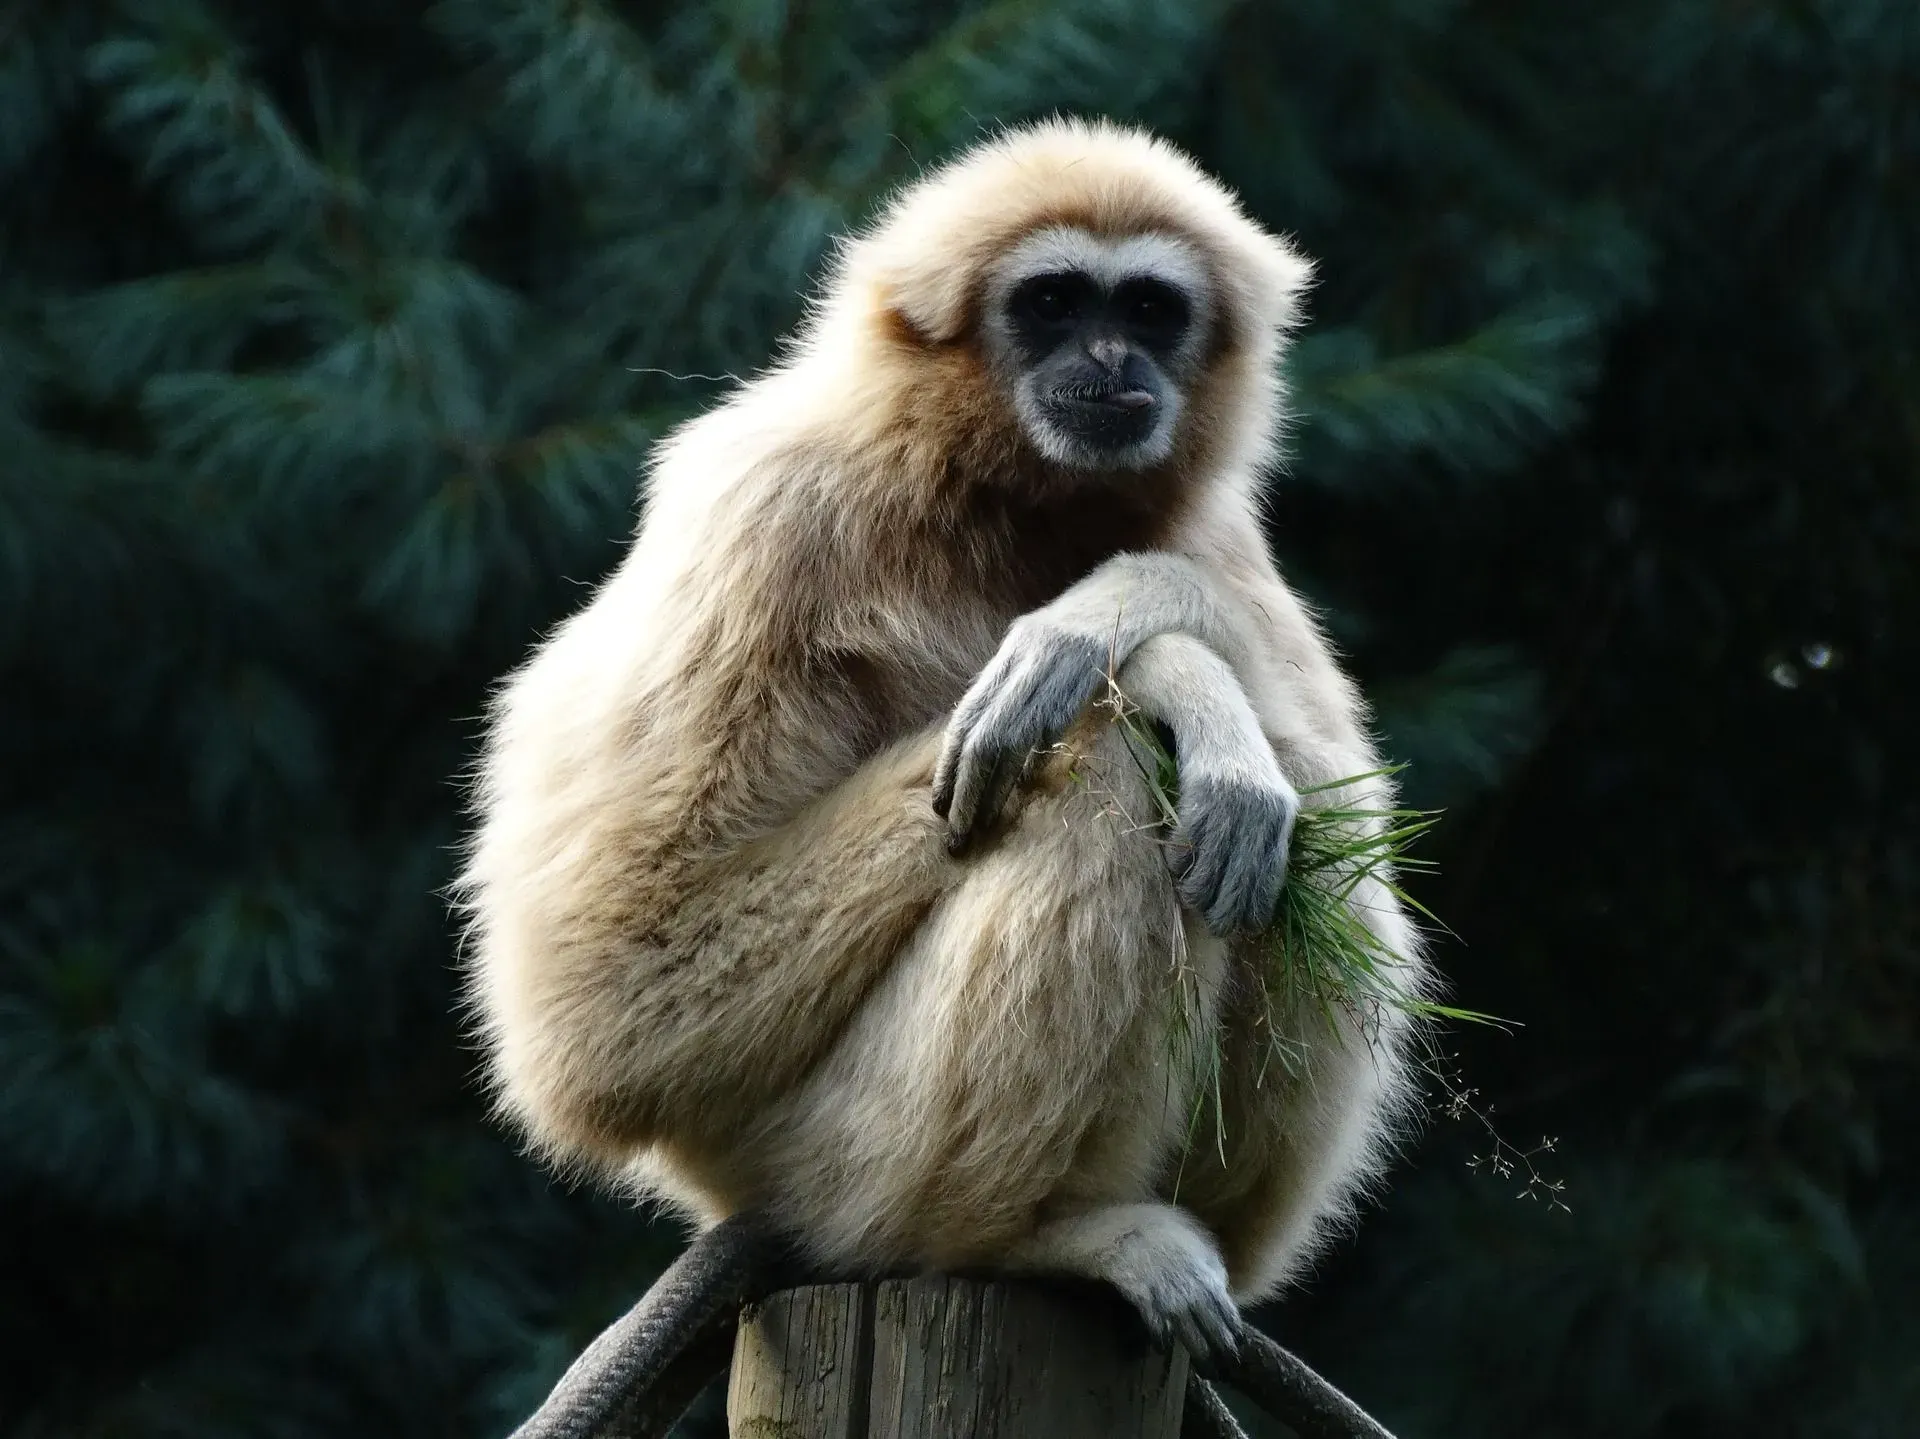 The lar gibbon ape has white-colored feet and hands.